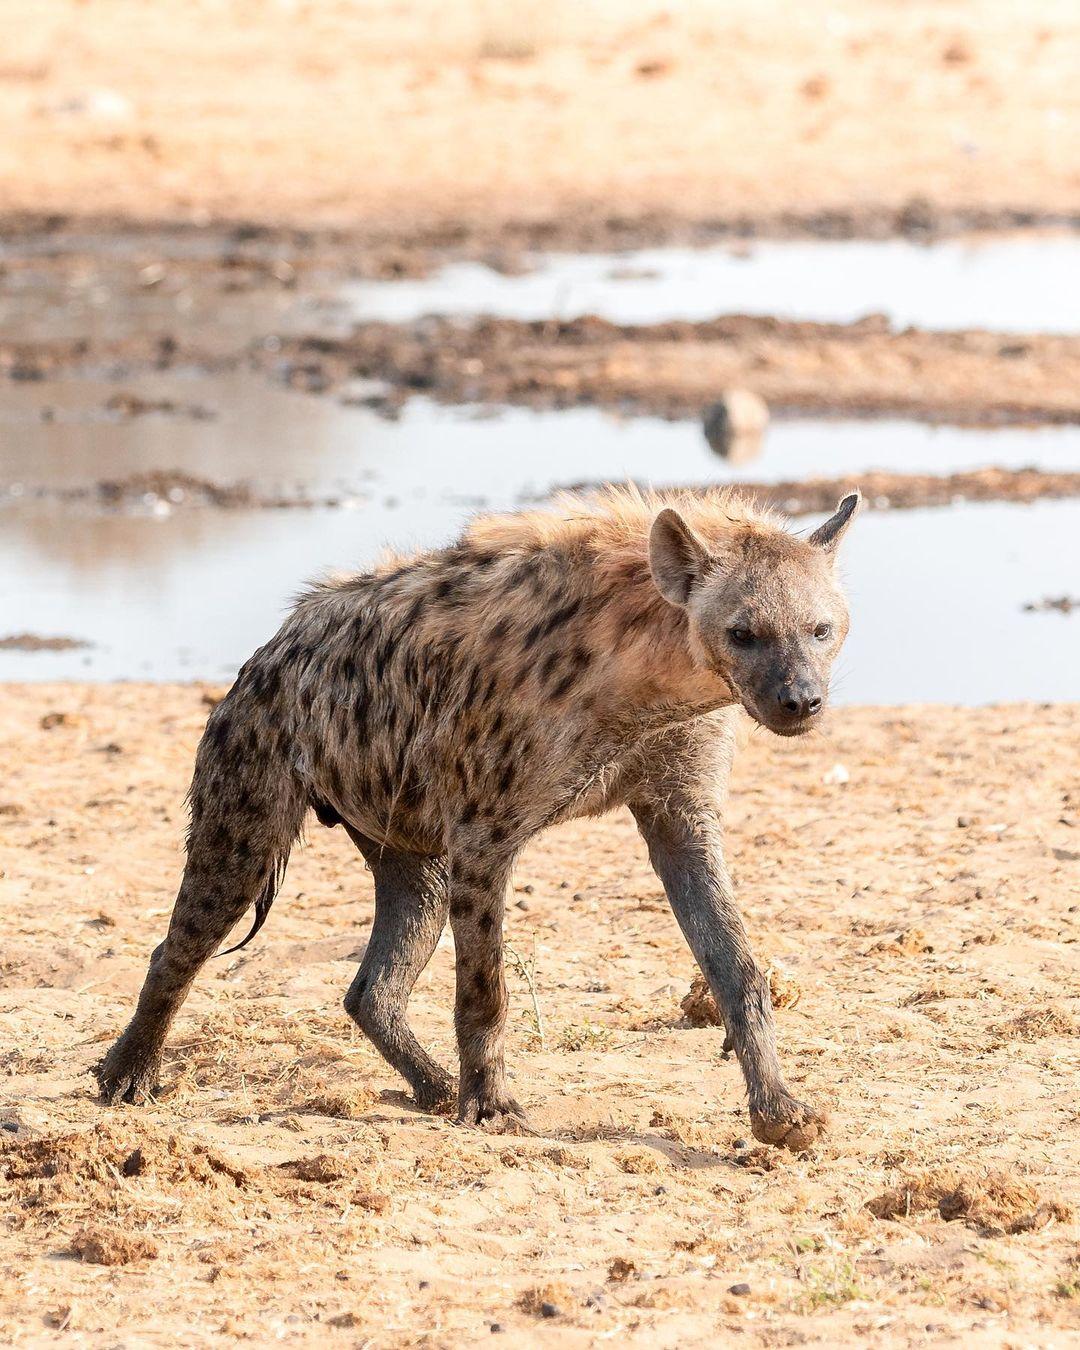 class="content__text"
 Face to face with Spotted Hyenas 😬

Hyenas are more than purely scavengers. They are strong, smart, resilient and great hunters whether alone or in their clan groups.

Swipe left to see where this Hyena is headed &gt;&gt;&gt; 
 